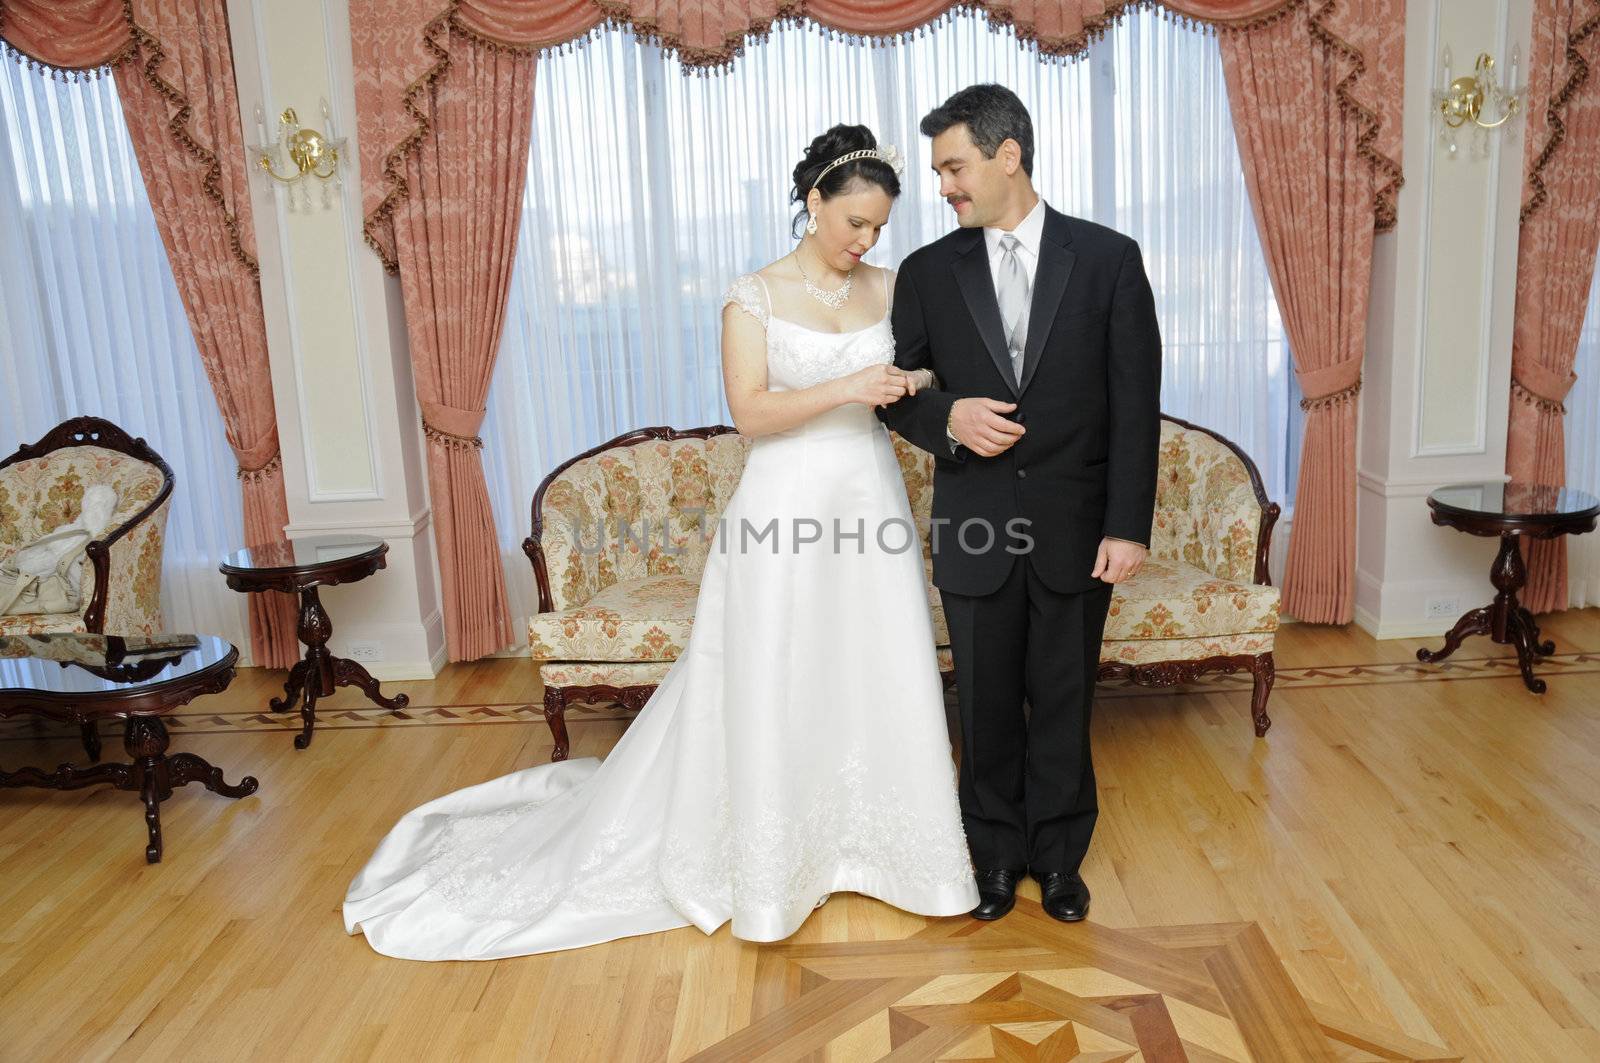 Bride and Groom - formal wedding image in Russian consulate, San Francisco